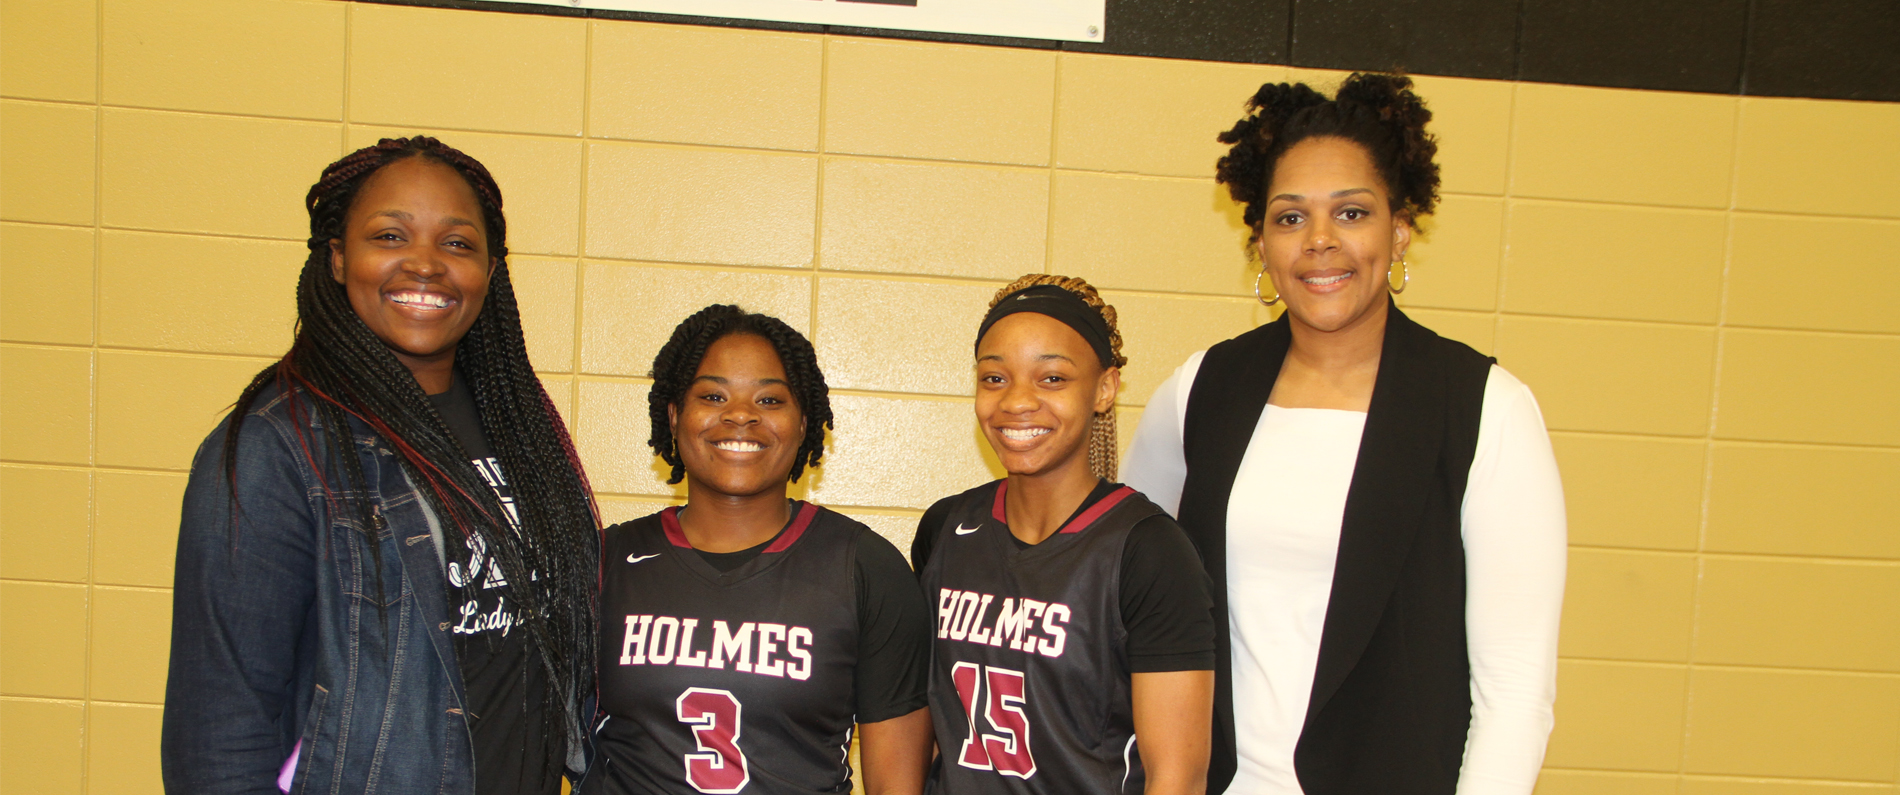 Collier, Harris represent Holmes in All-Star Game